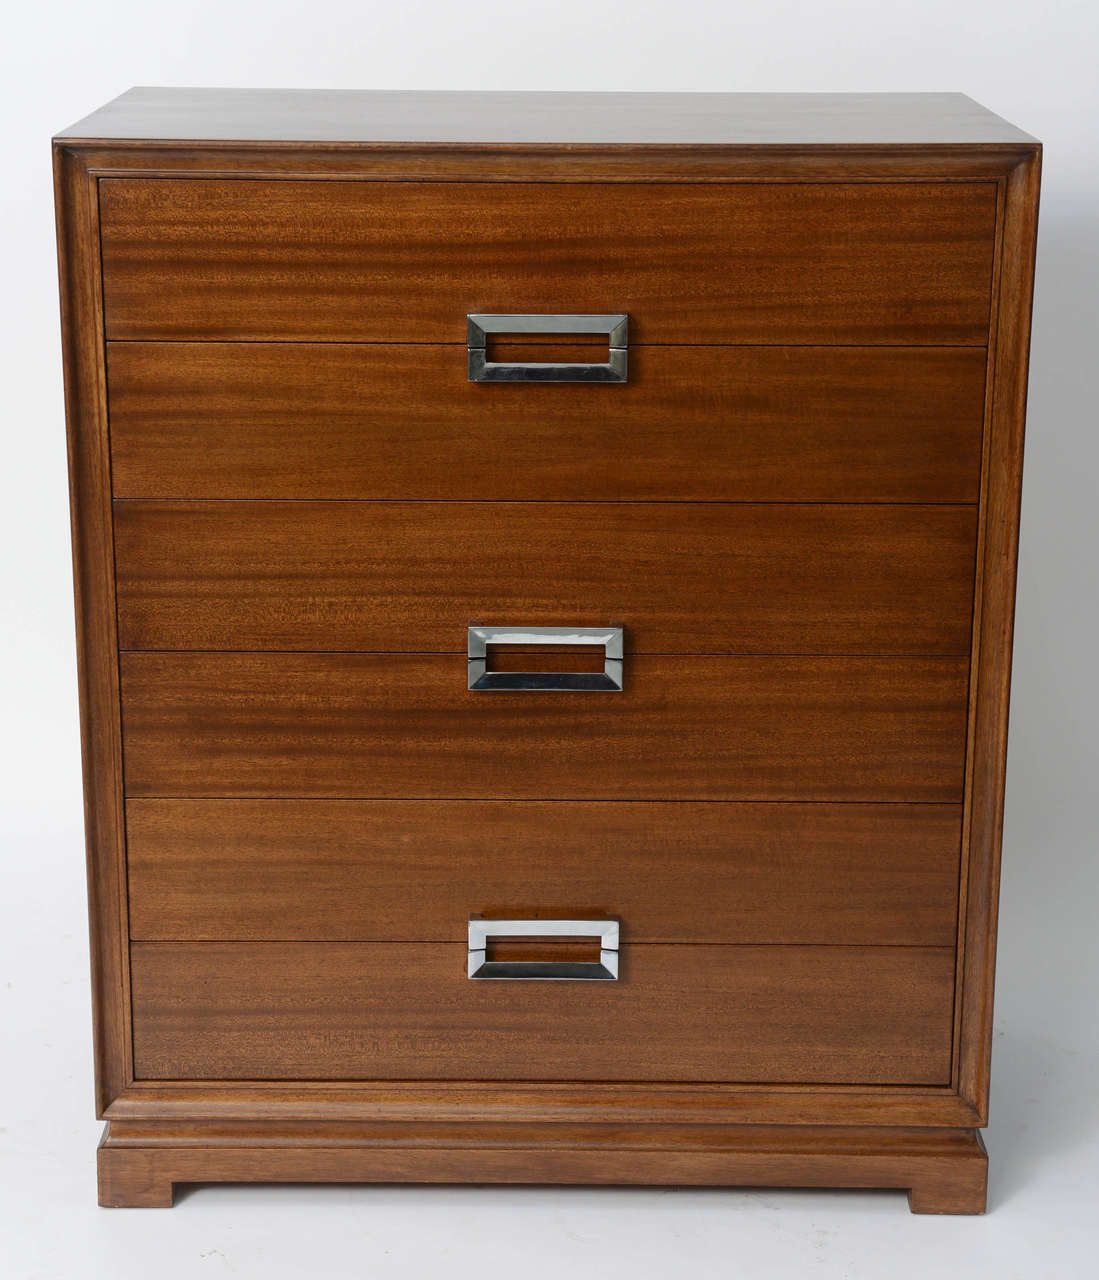 ..REDUCED FROM $3,000 FOR SATURDAY SALE..A fine 1940s Paul Frankl style mahogany six drawer gentleman's chest of drawers providing great storage by the noted Red Lion Table Co. of Red Lion, PA. Polished nickel handles and strong, yet simple lines